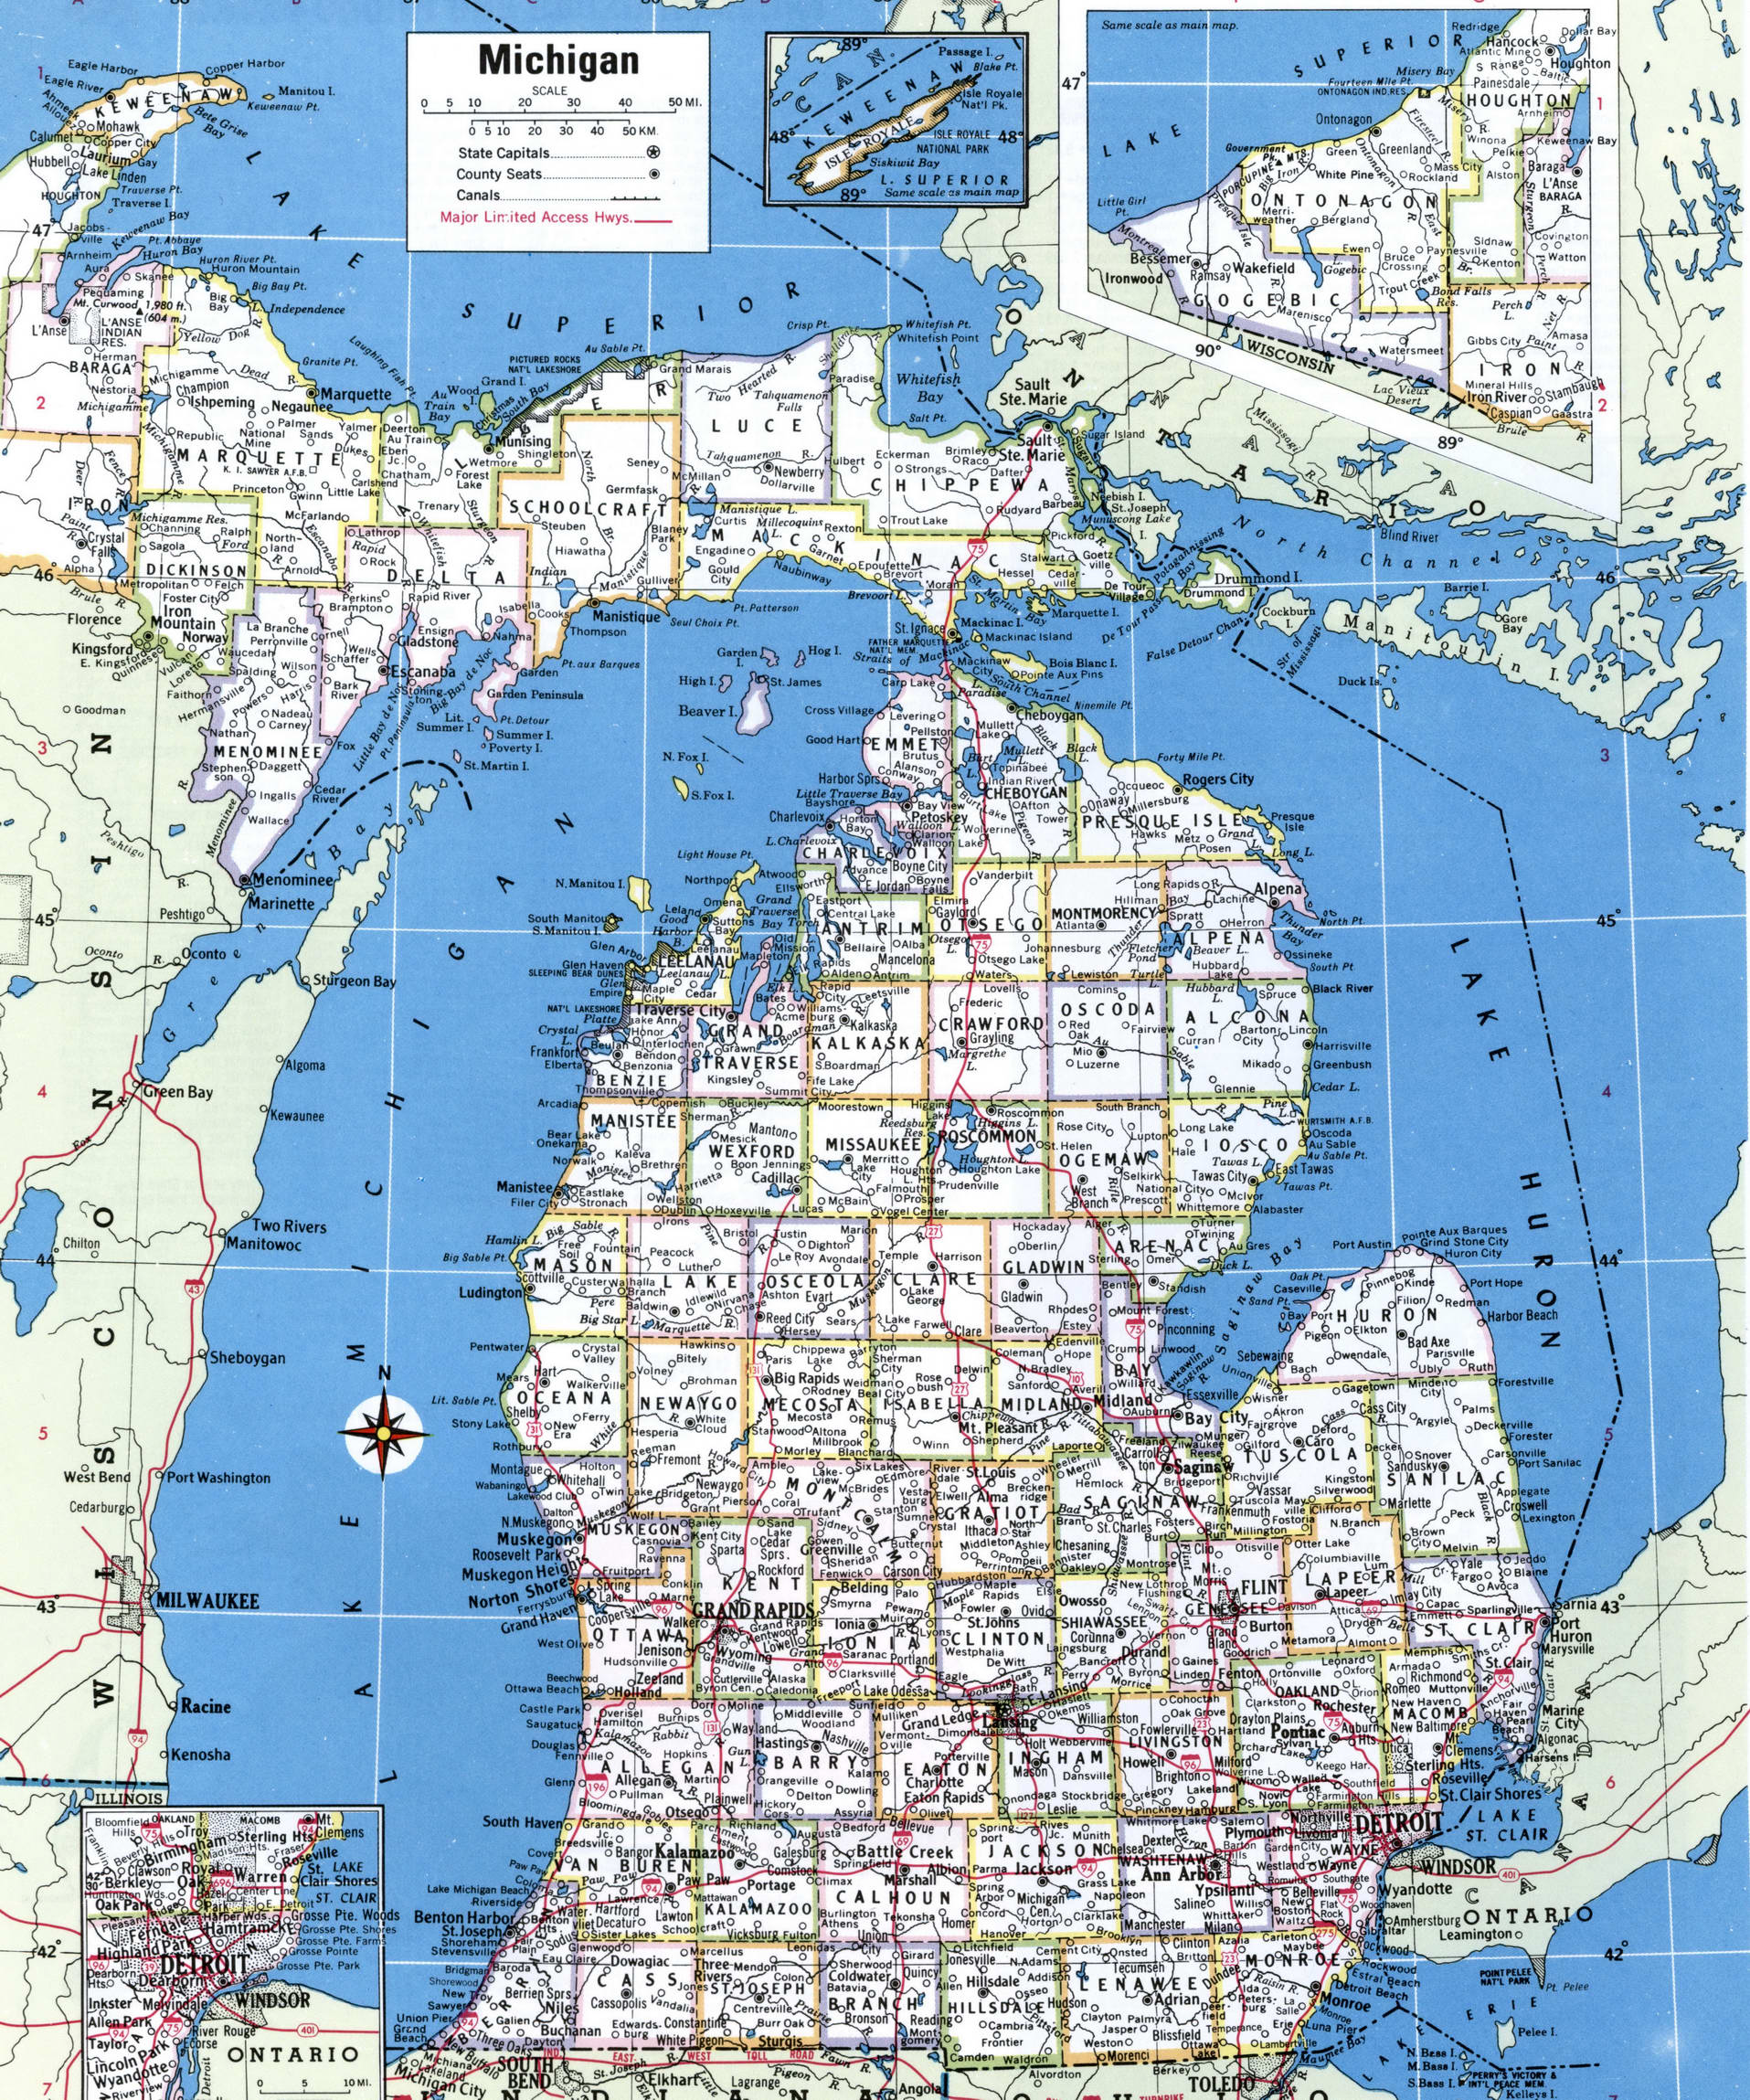 Michigan map with counties